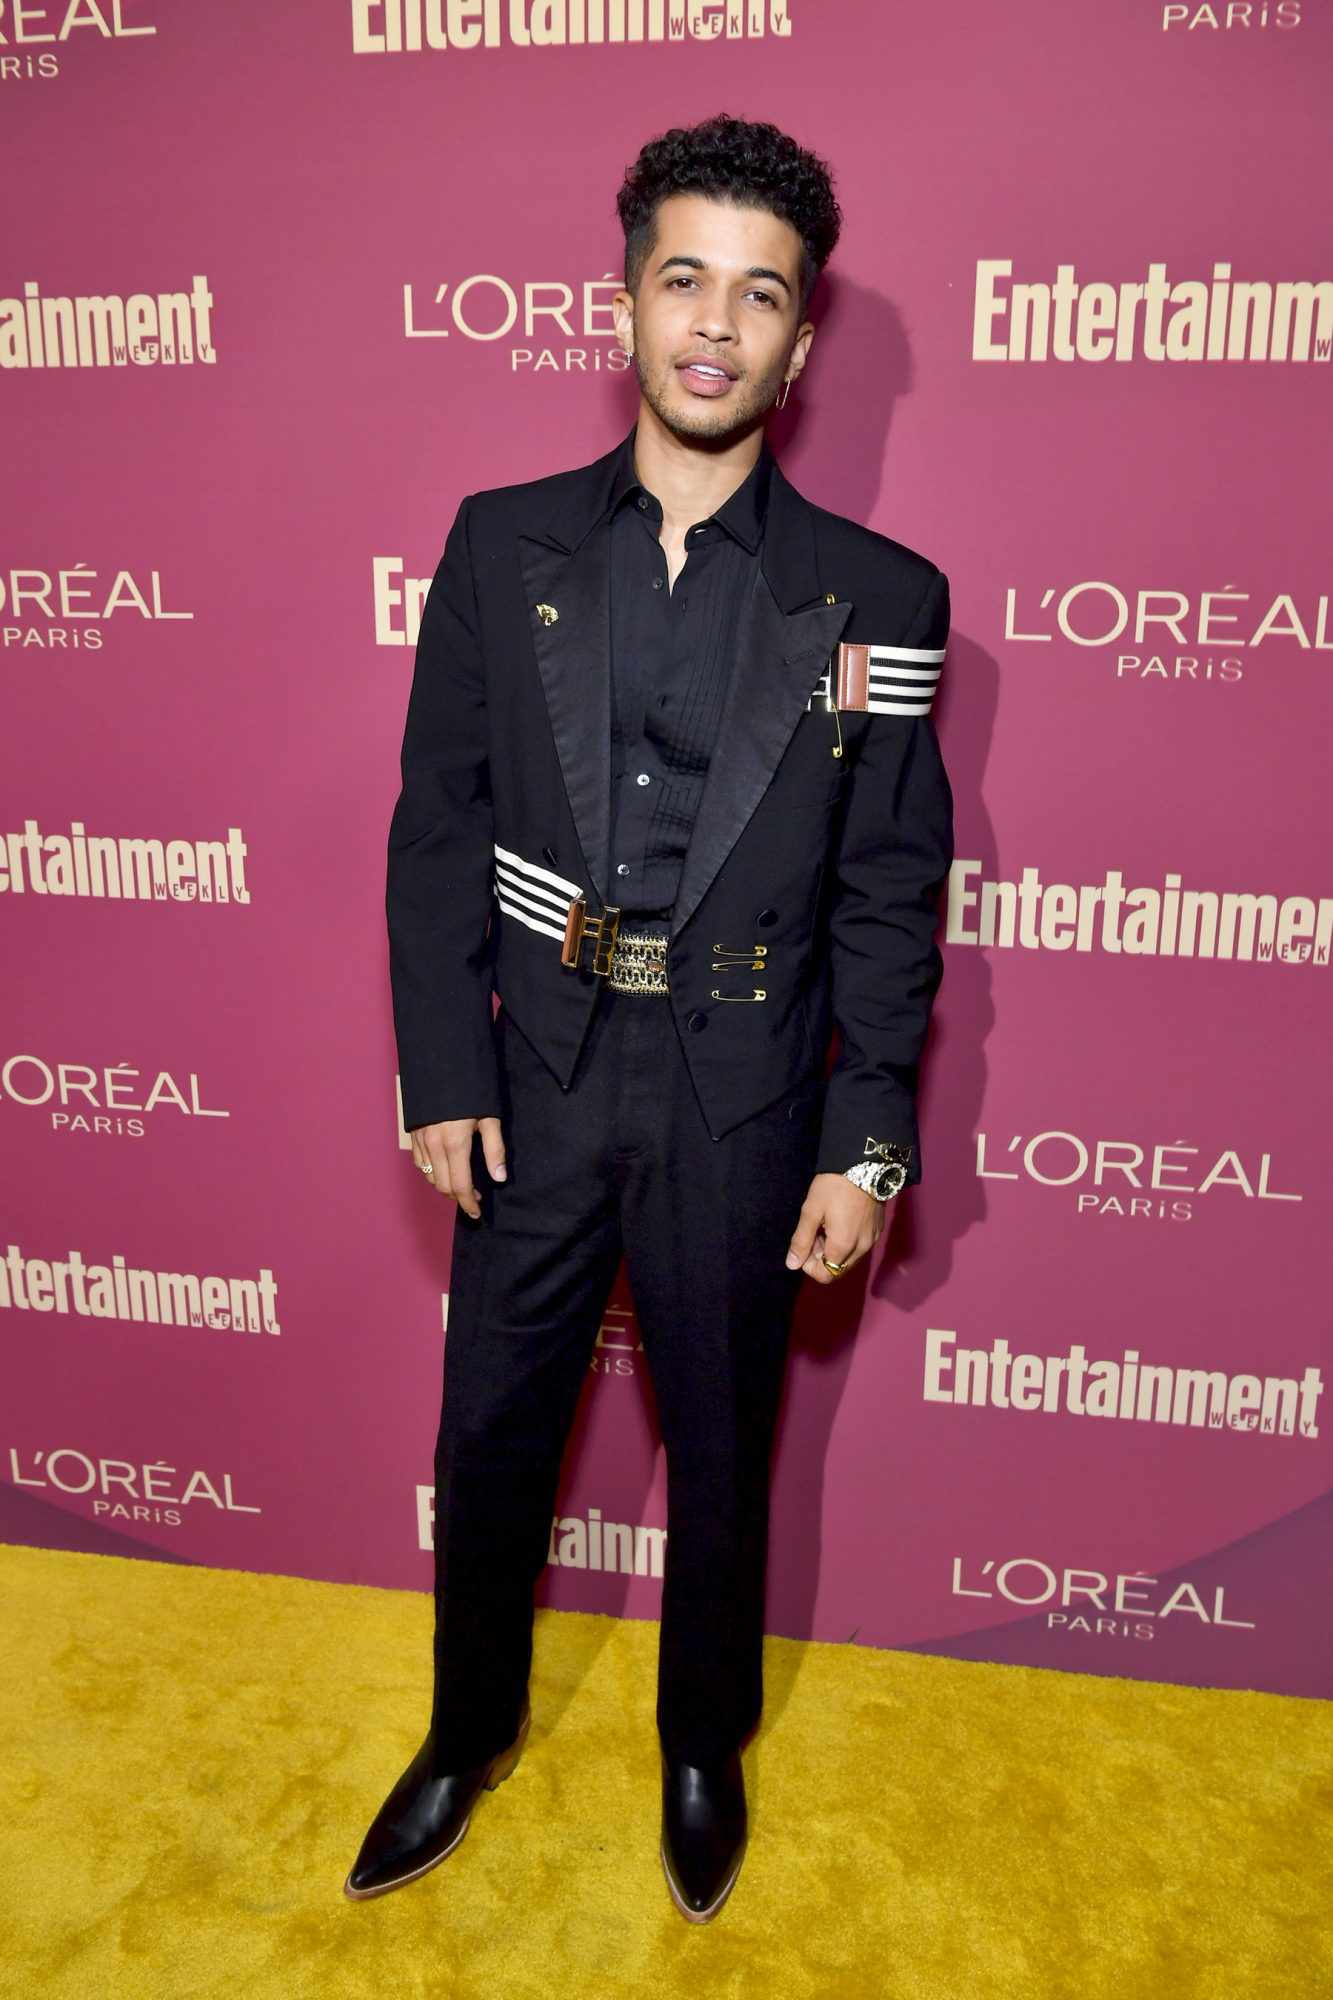 Entertainment Weekly And L'Oreal Paris Hosts The 2019 Pre-Emmy Party - Arrivals